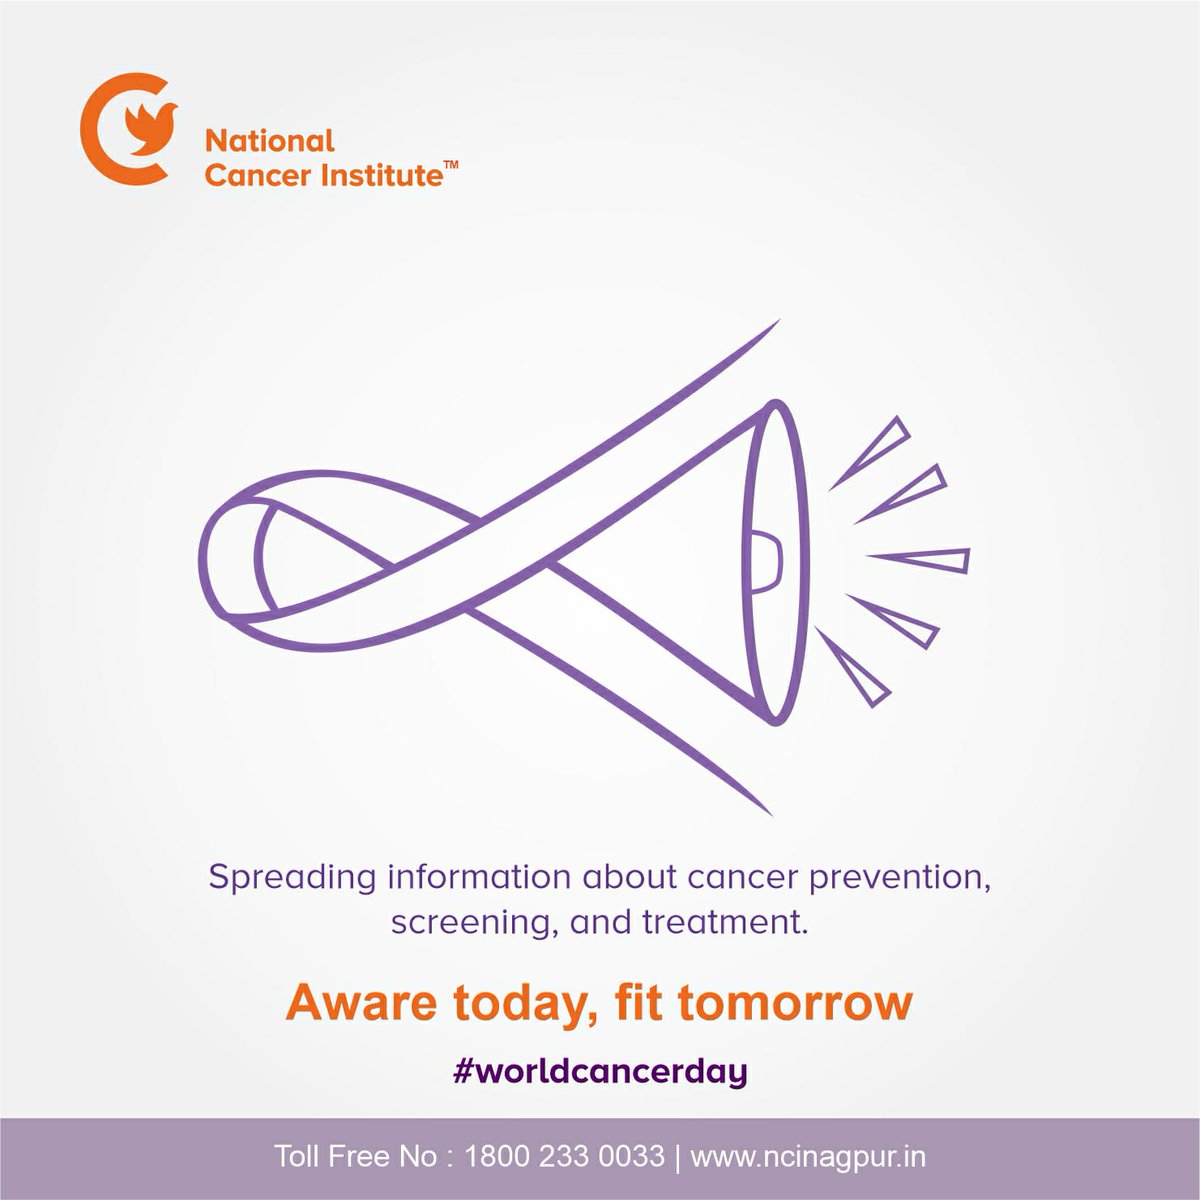 Empower yourself with knowledge on cancer prevention, screening and treatment, and spread awareness to defeat the fear of cancer. . . . . #yeswecare #oncology #cancercareindia #healthcareinnovation #healthcareindia #cancerwarrior #karkyoddha #cancerawareness #cancertreatment